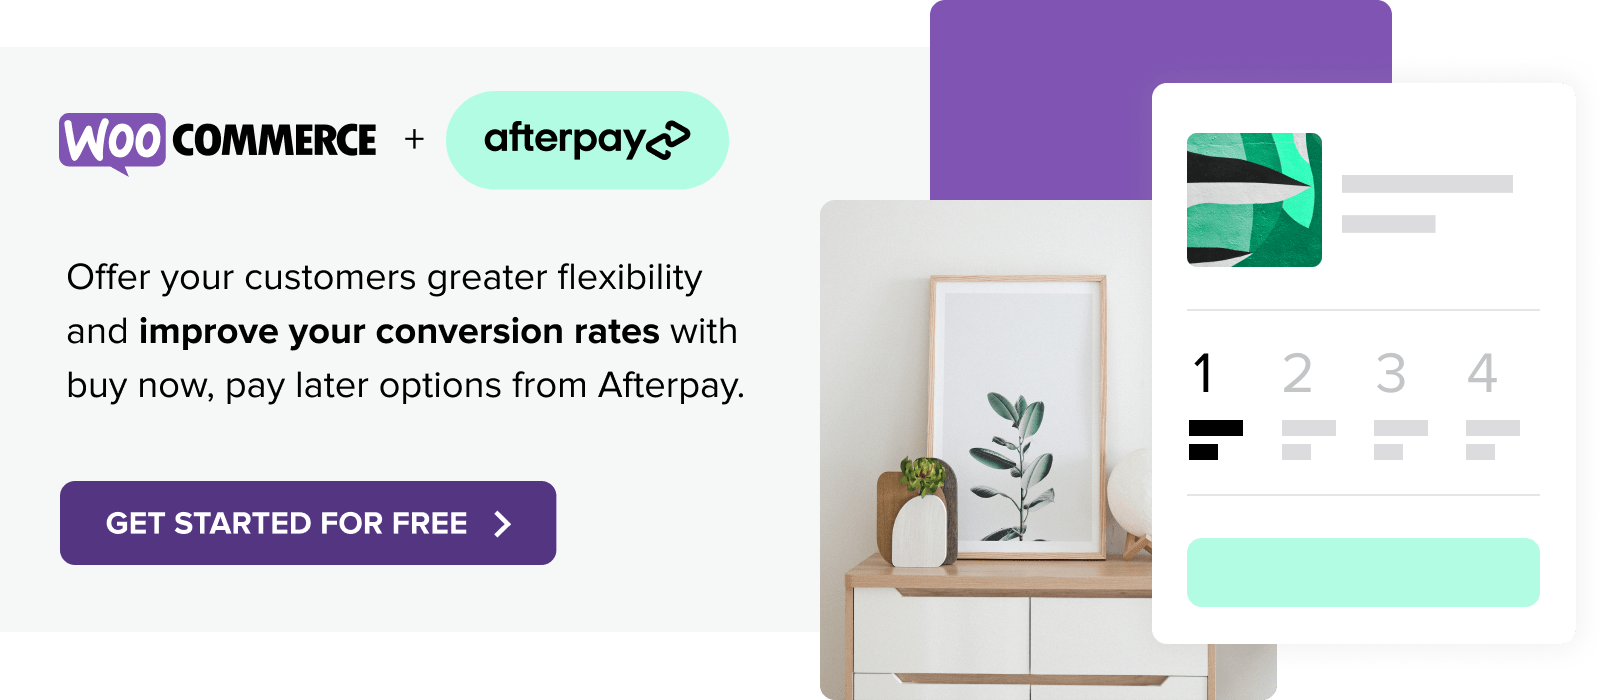 Offer buy now, pay later options with Afterpay